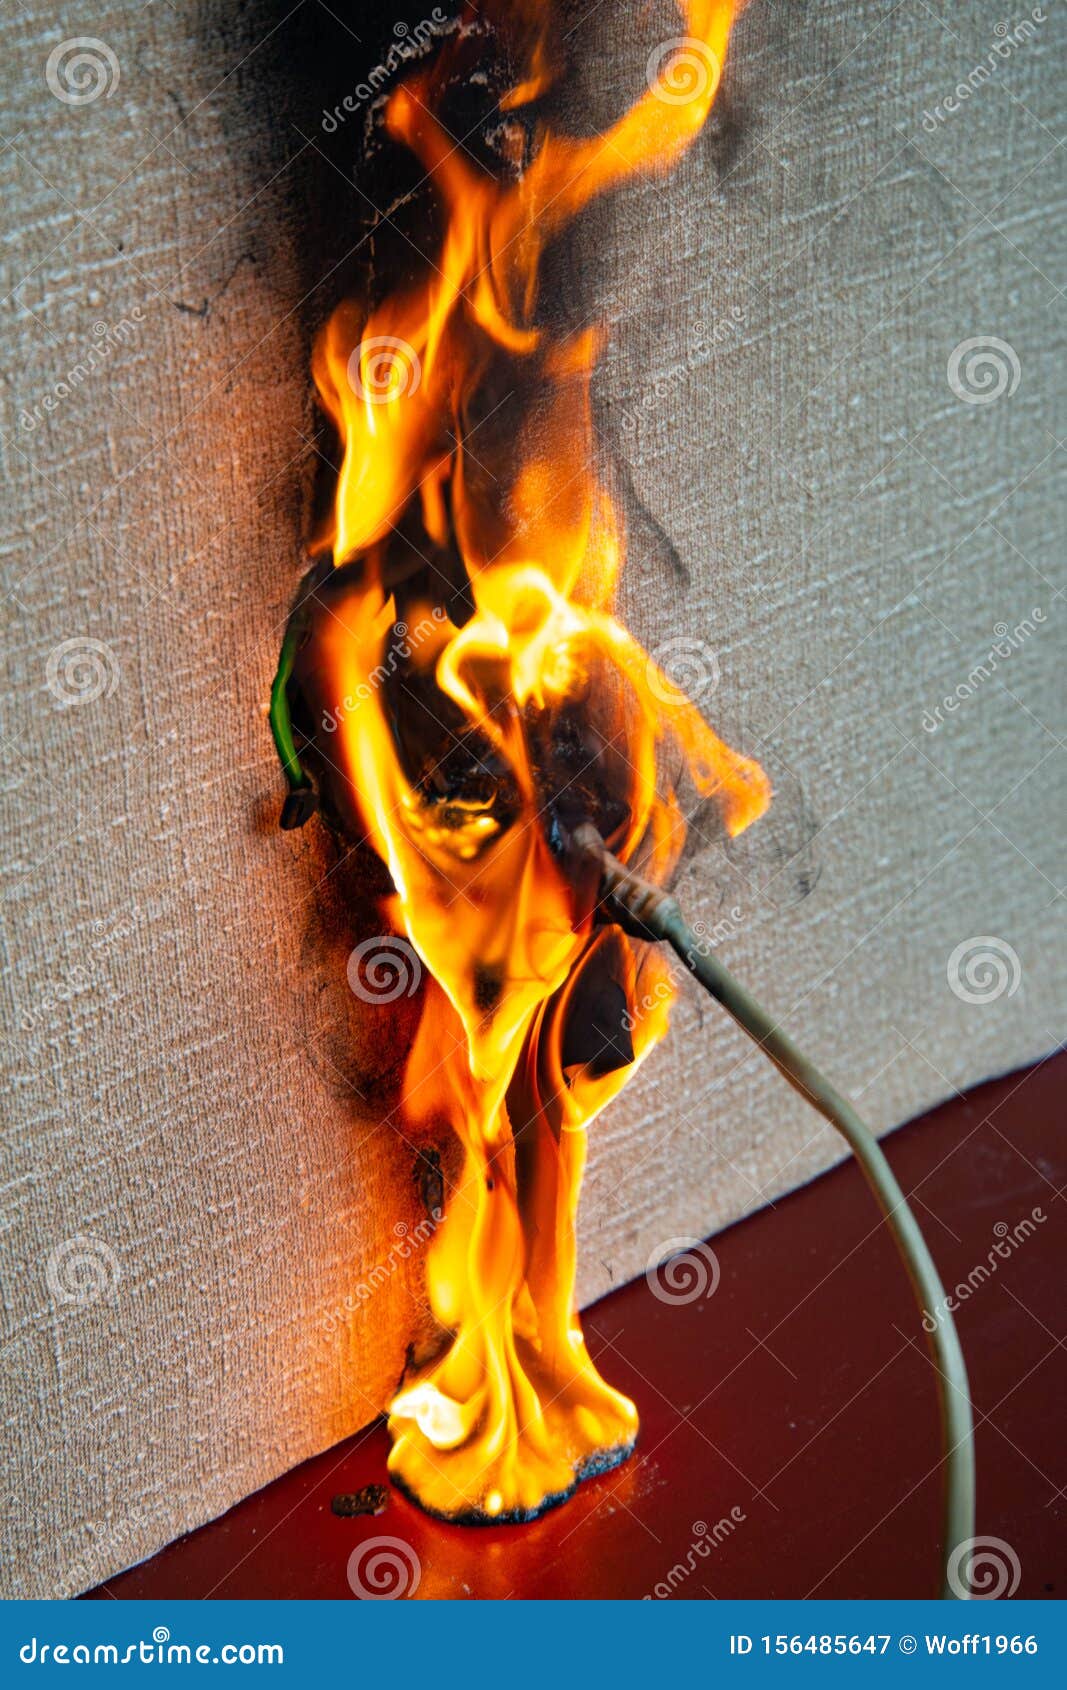 burning-electrical-wiring-electrical-outlet-faulty-wiring-causes-fires-poor-old-wiring-causes-fire-electrical-outlet-156485647.jpg